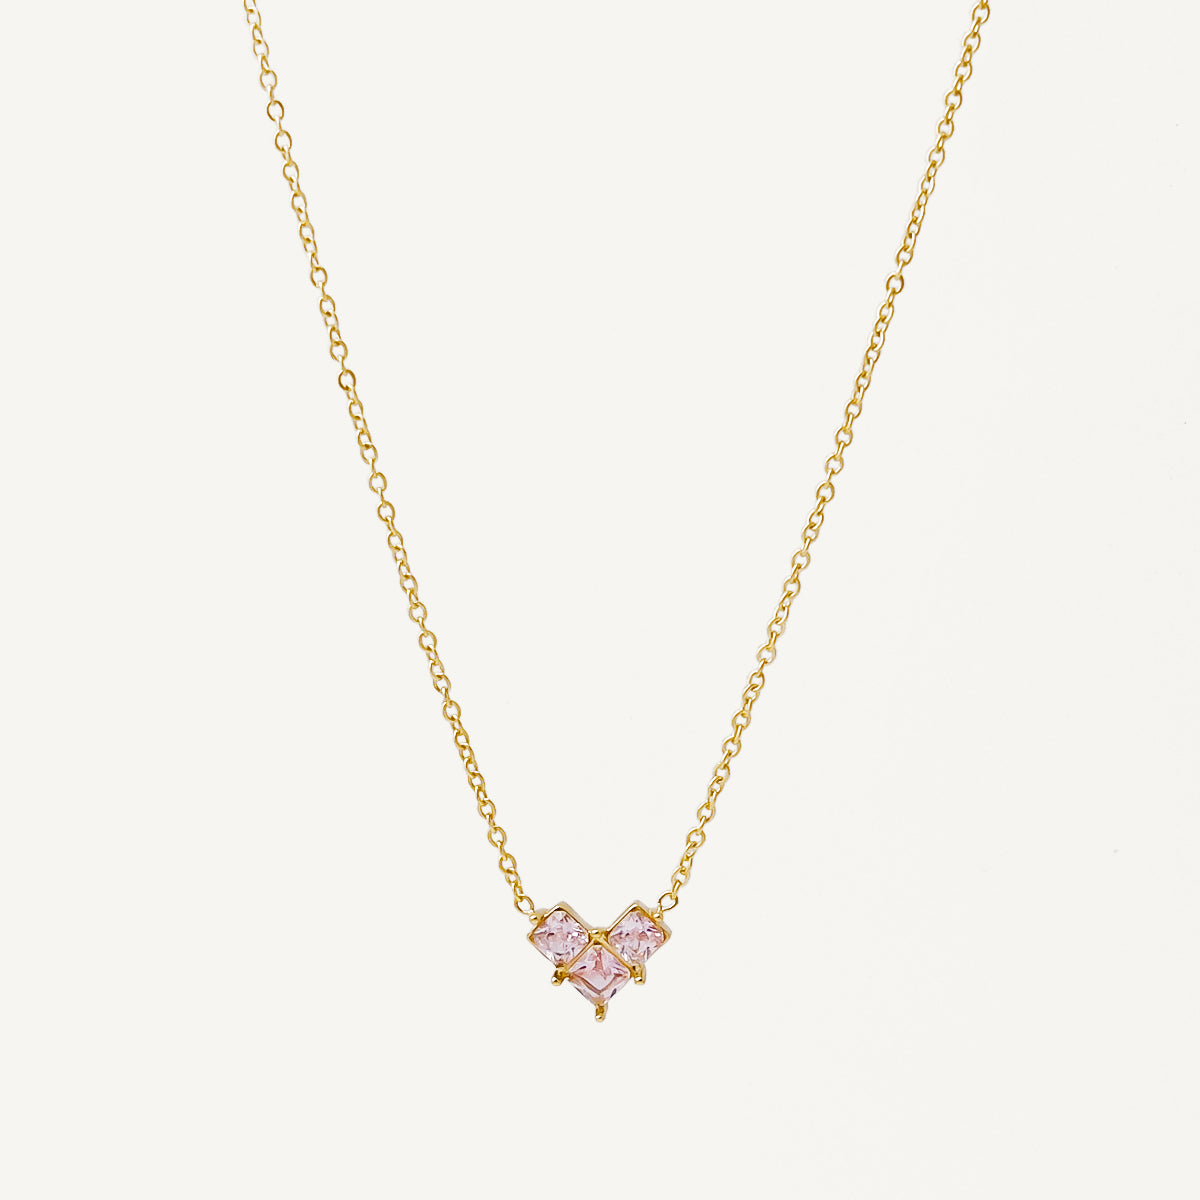 The Pink Ice Floating Heart Necklace